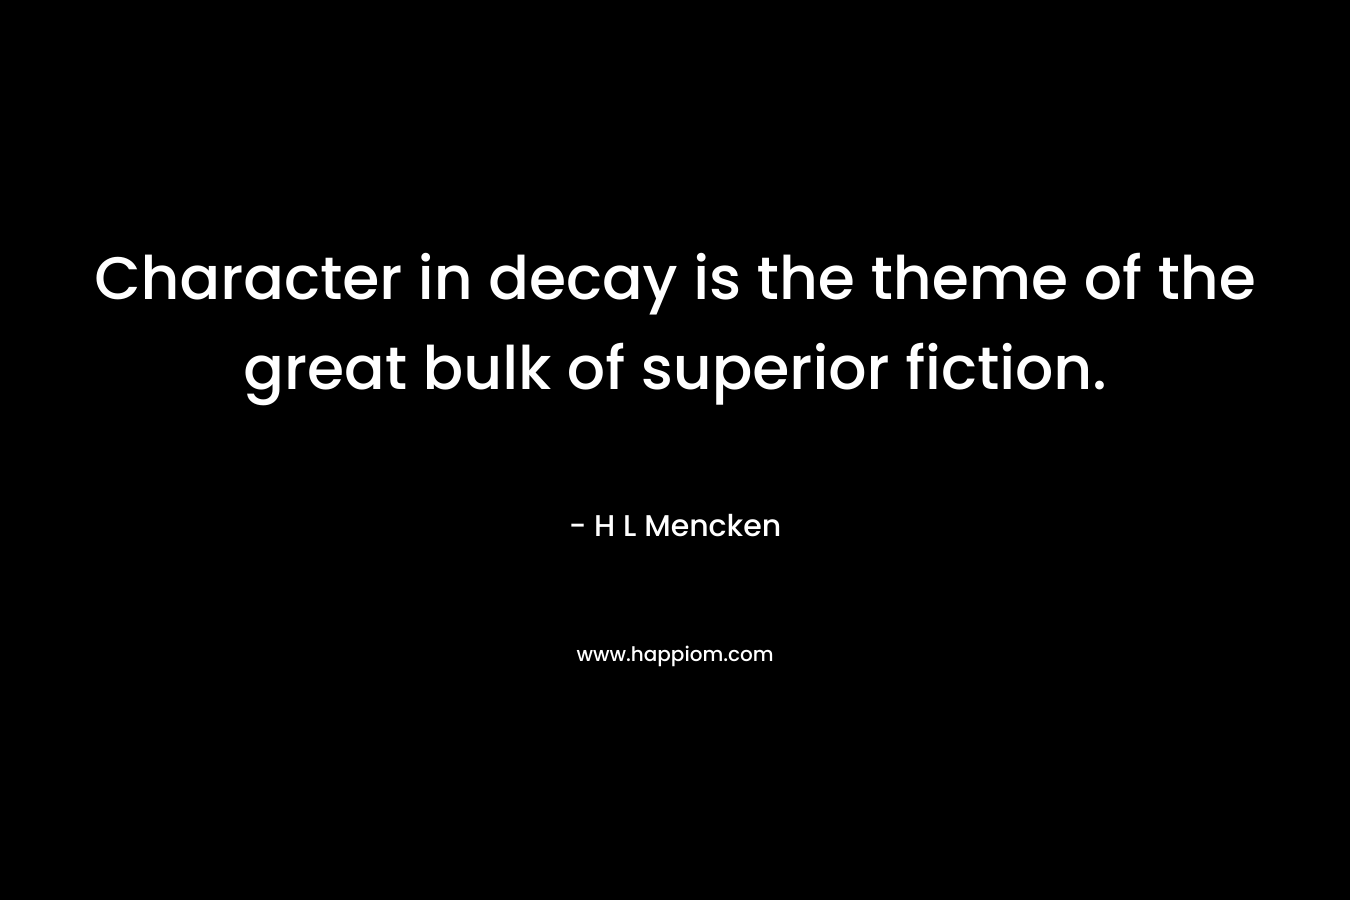 Character in decay is the theme of the great bulk of superior fiction.